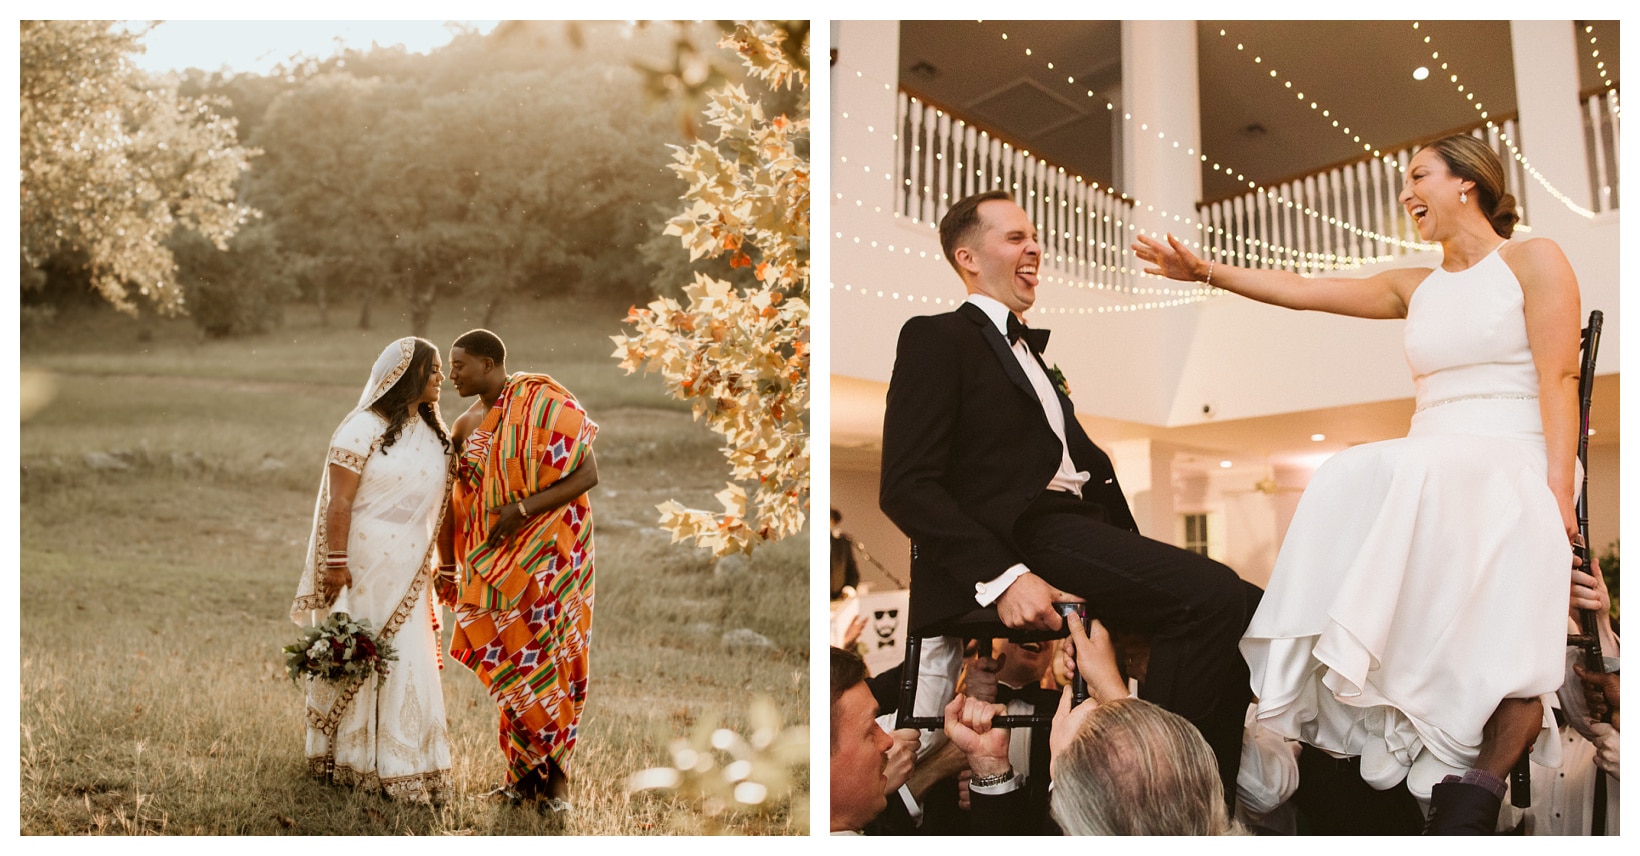 Collage of African-Indian wedding and Jewish wedding with couple on chairs